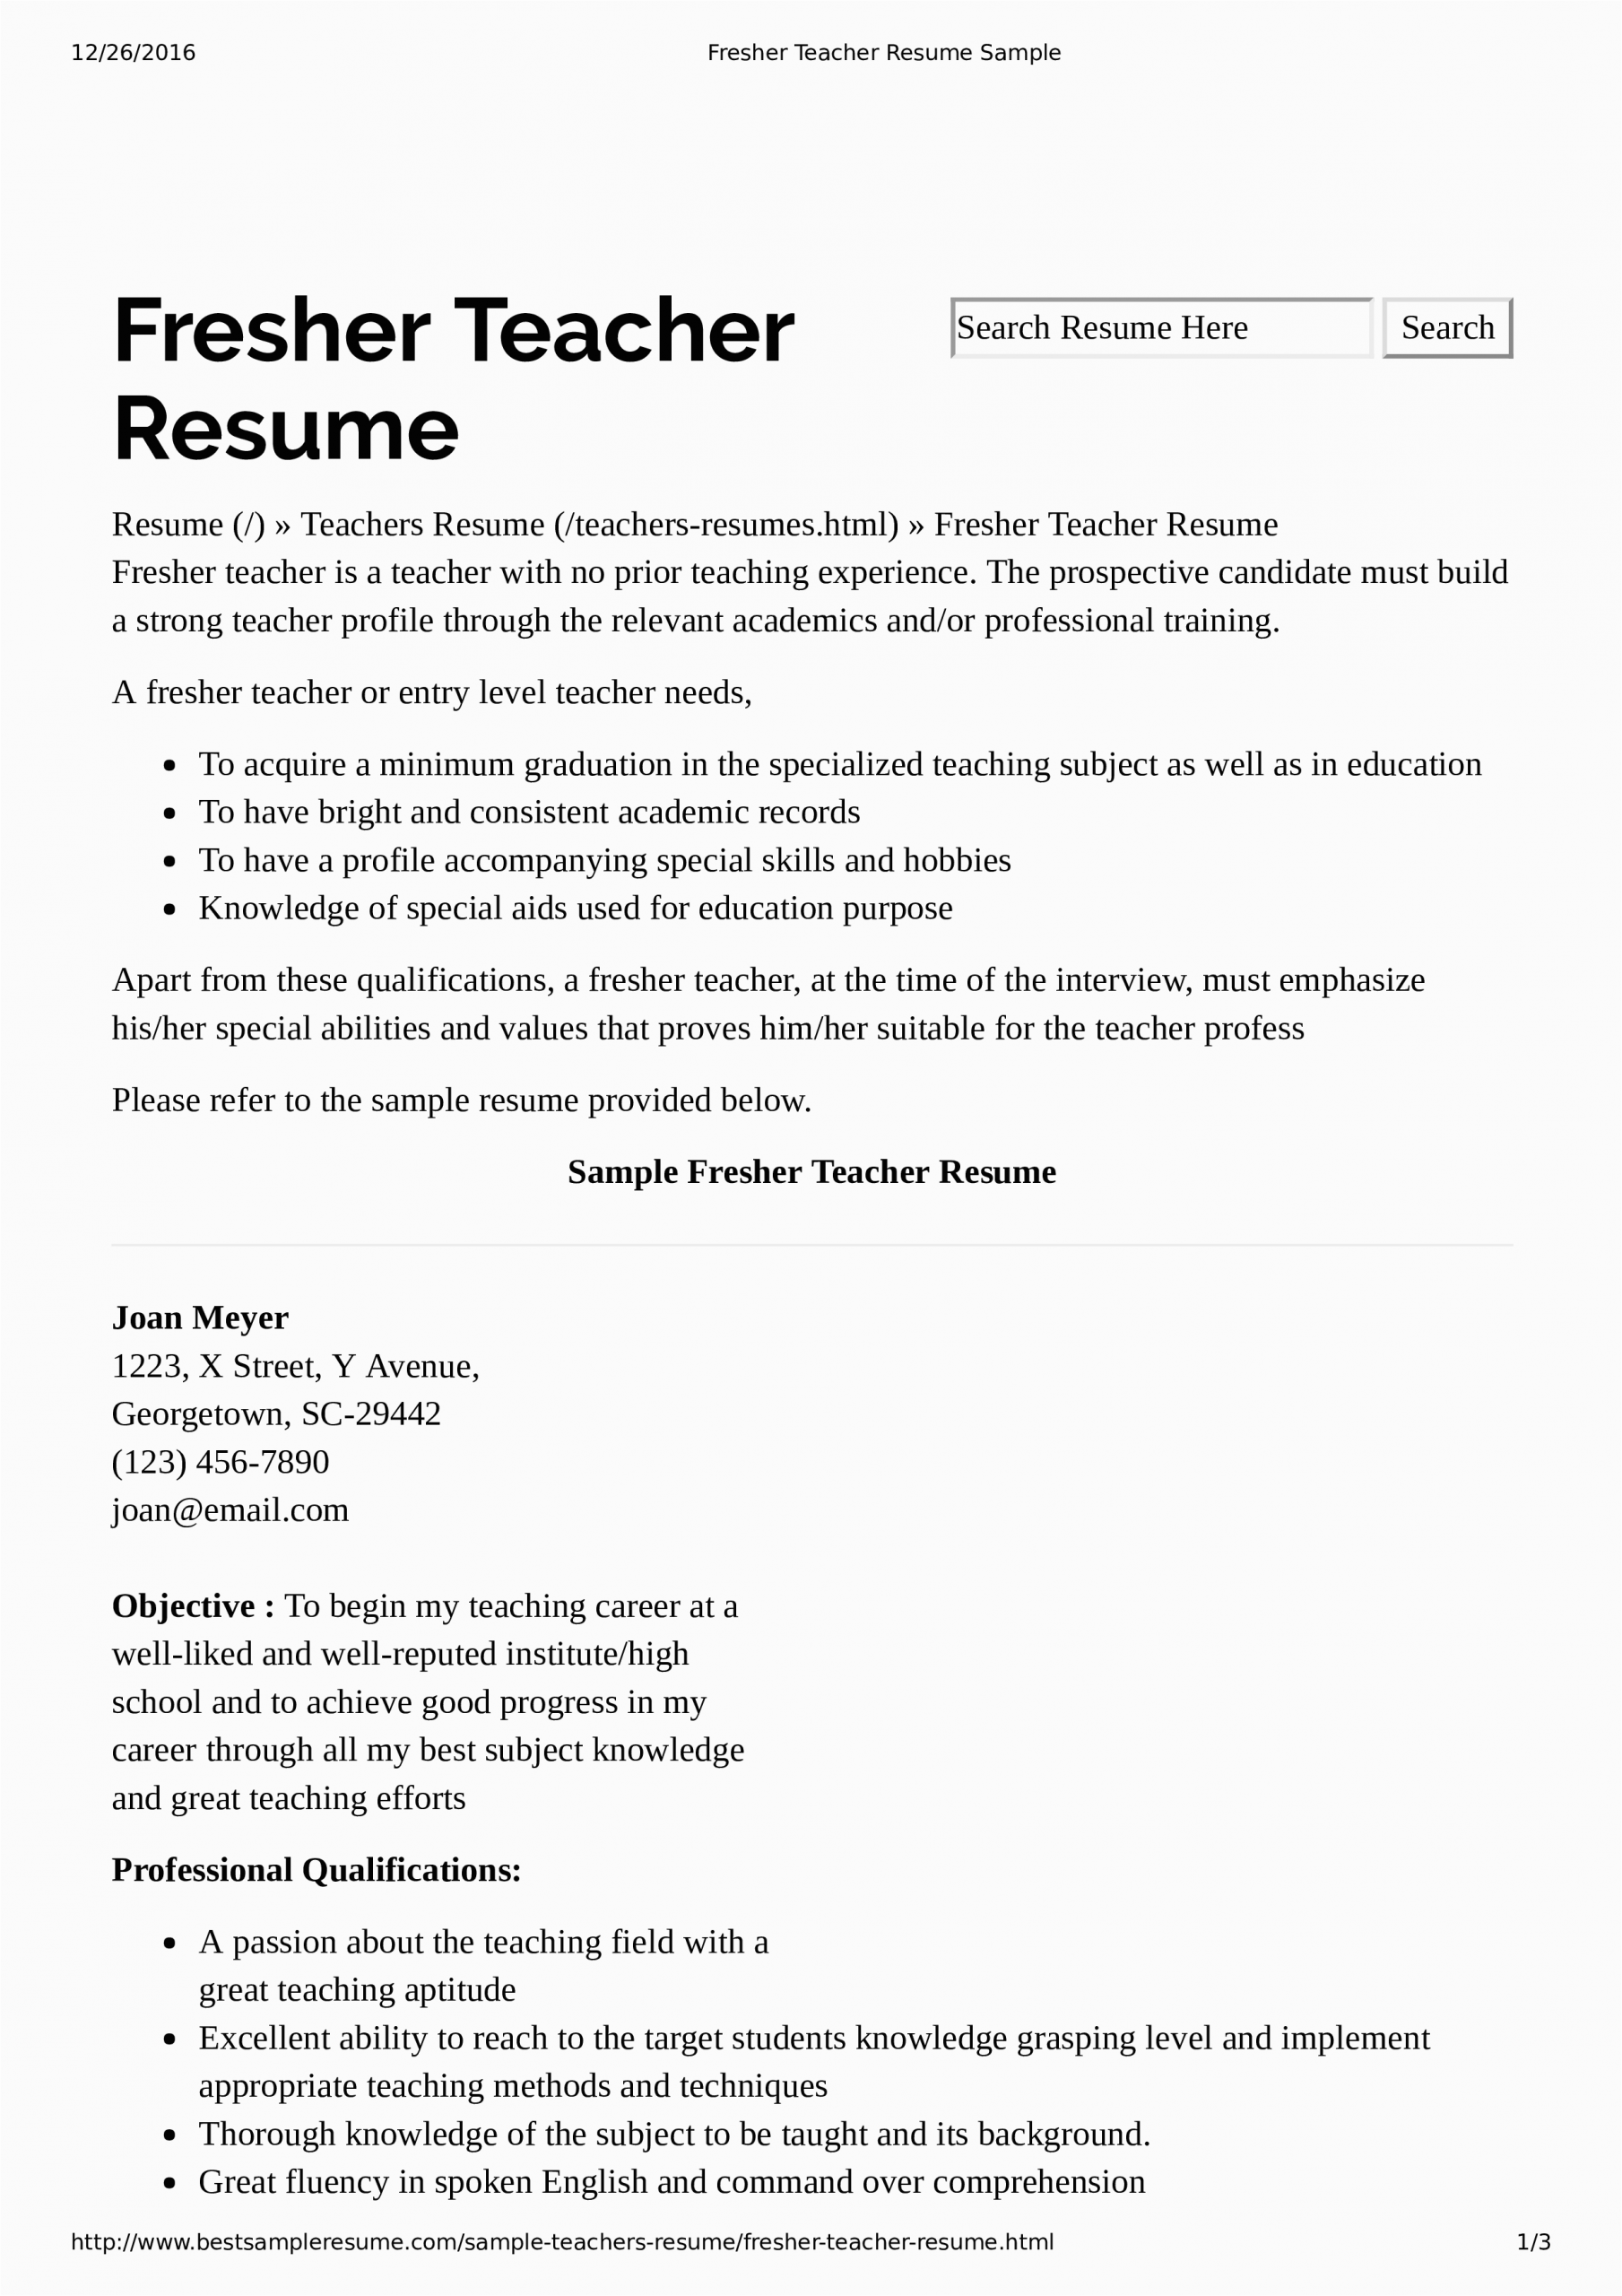 Sample Resume for Teachers without Experience In the Philippines Preschool Teacher Resume without Experience